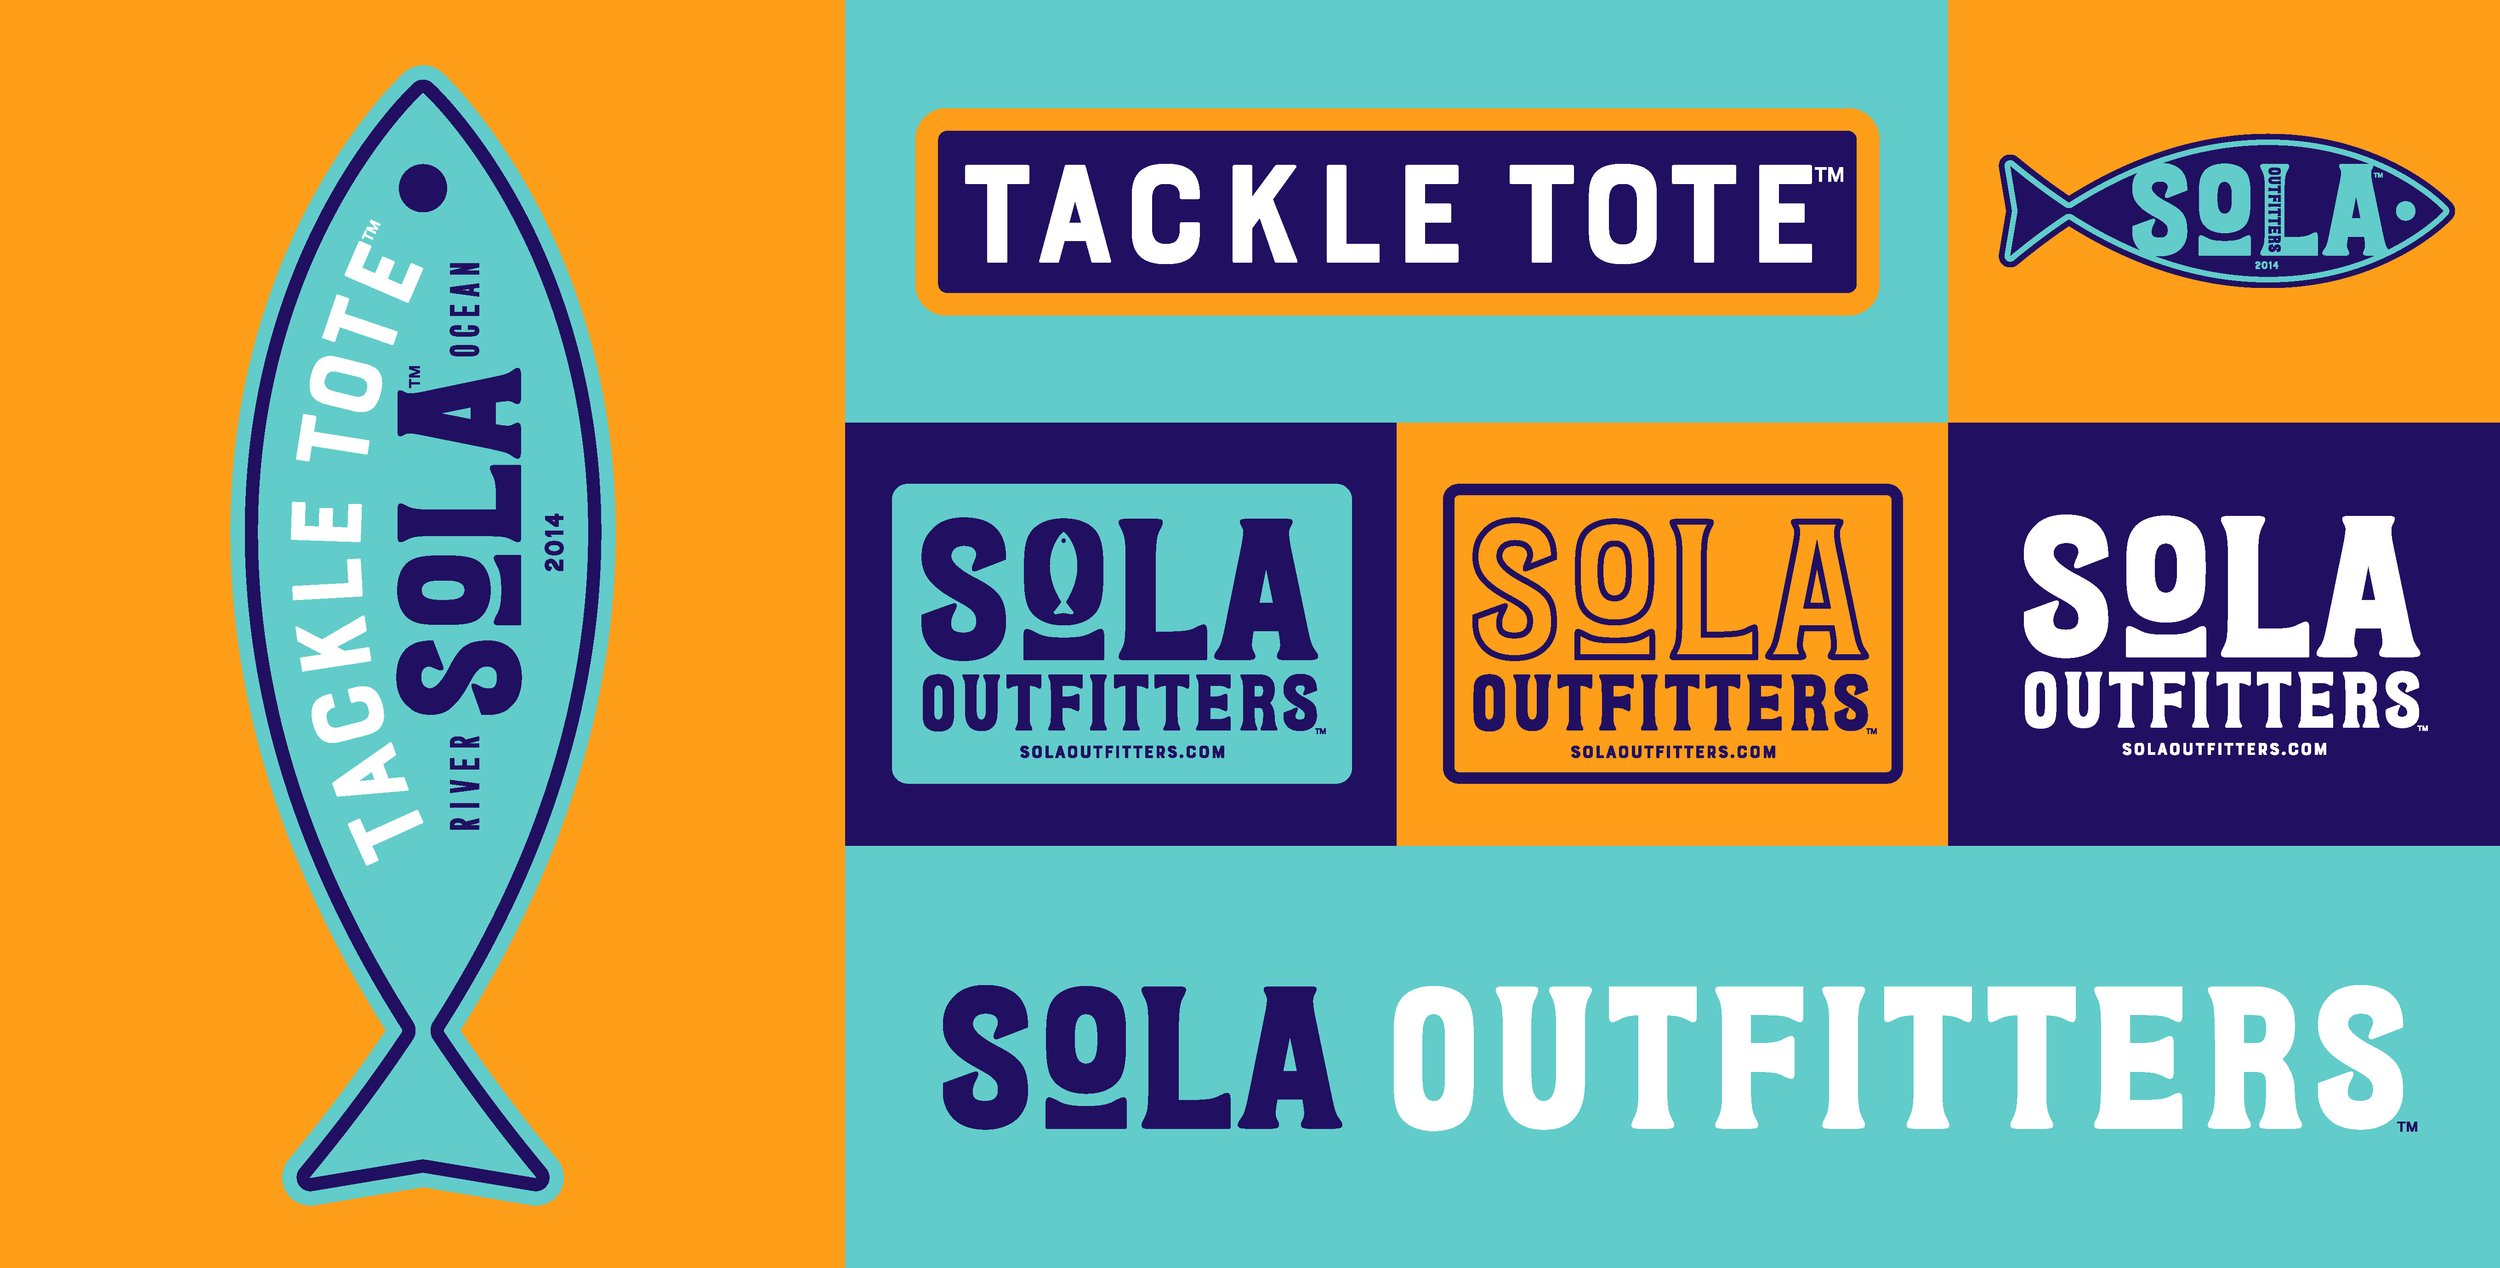  SoLA Outfitters &amp; Tackle Tote™  Design, product naming, branding design and creative direction by Chuck Mitchell 